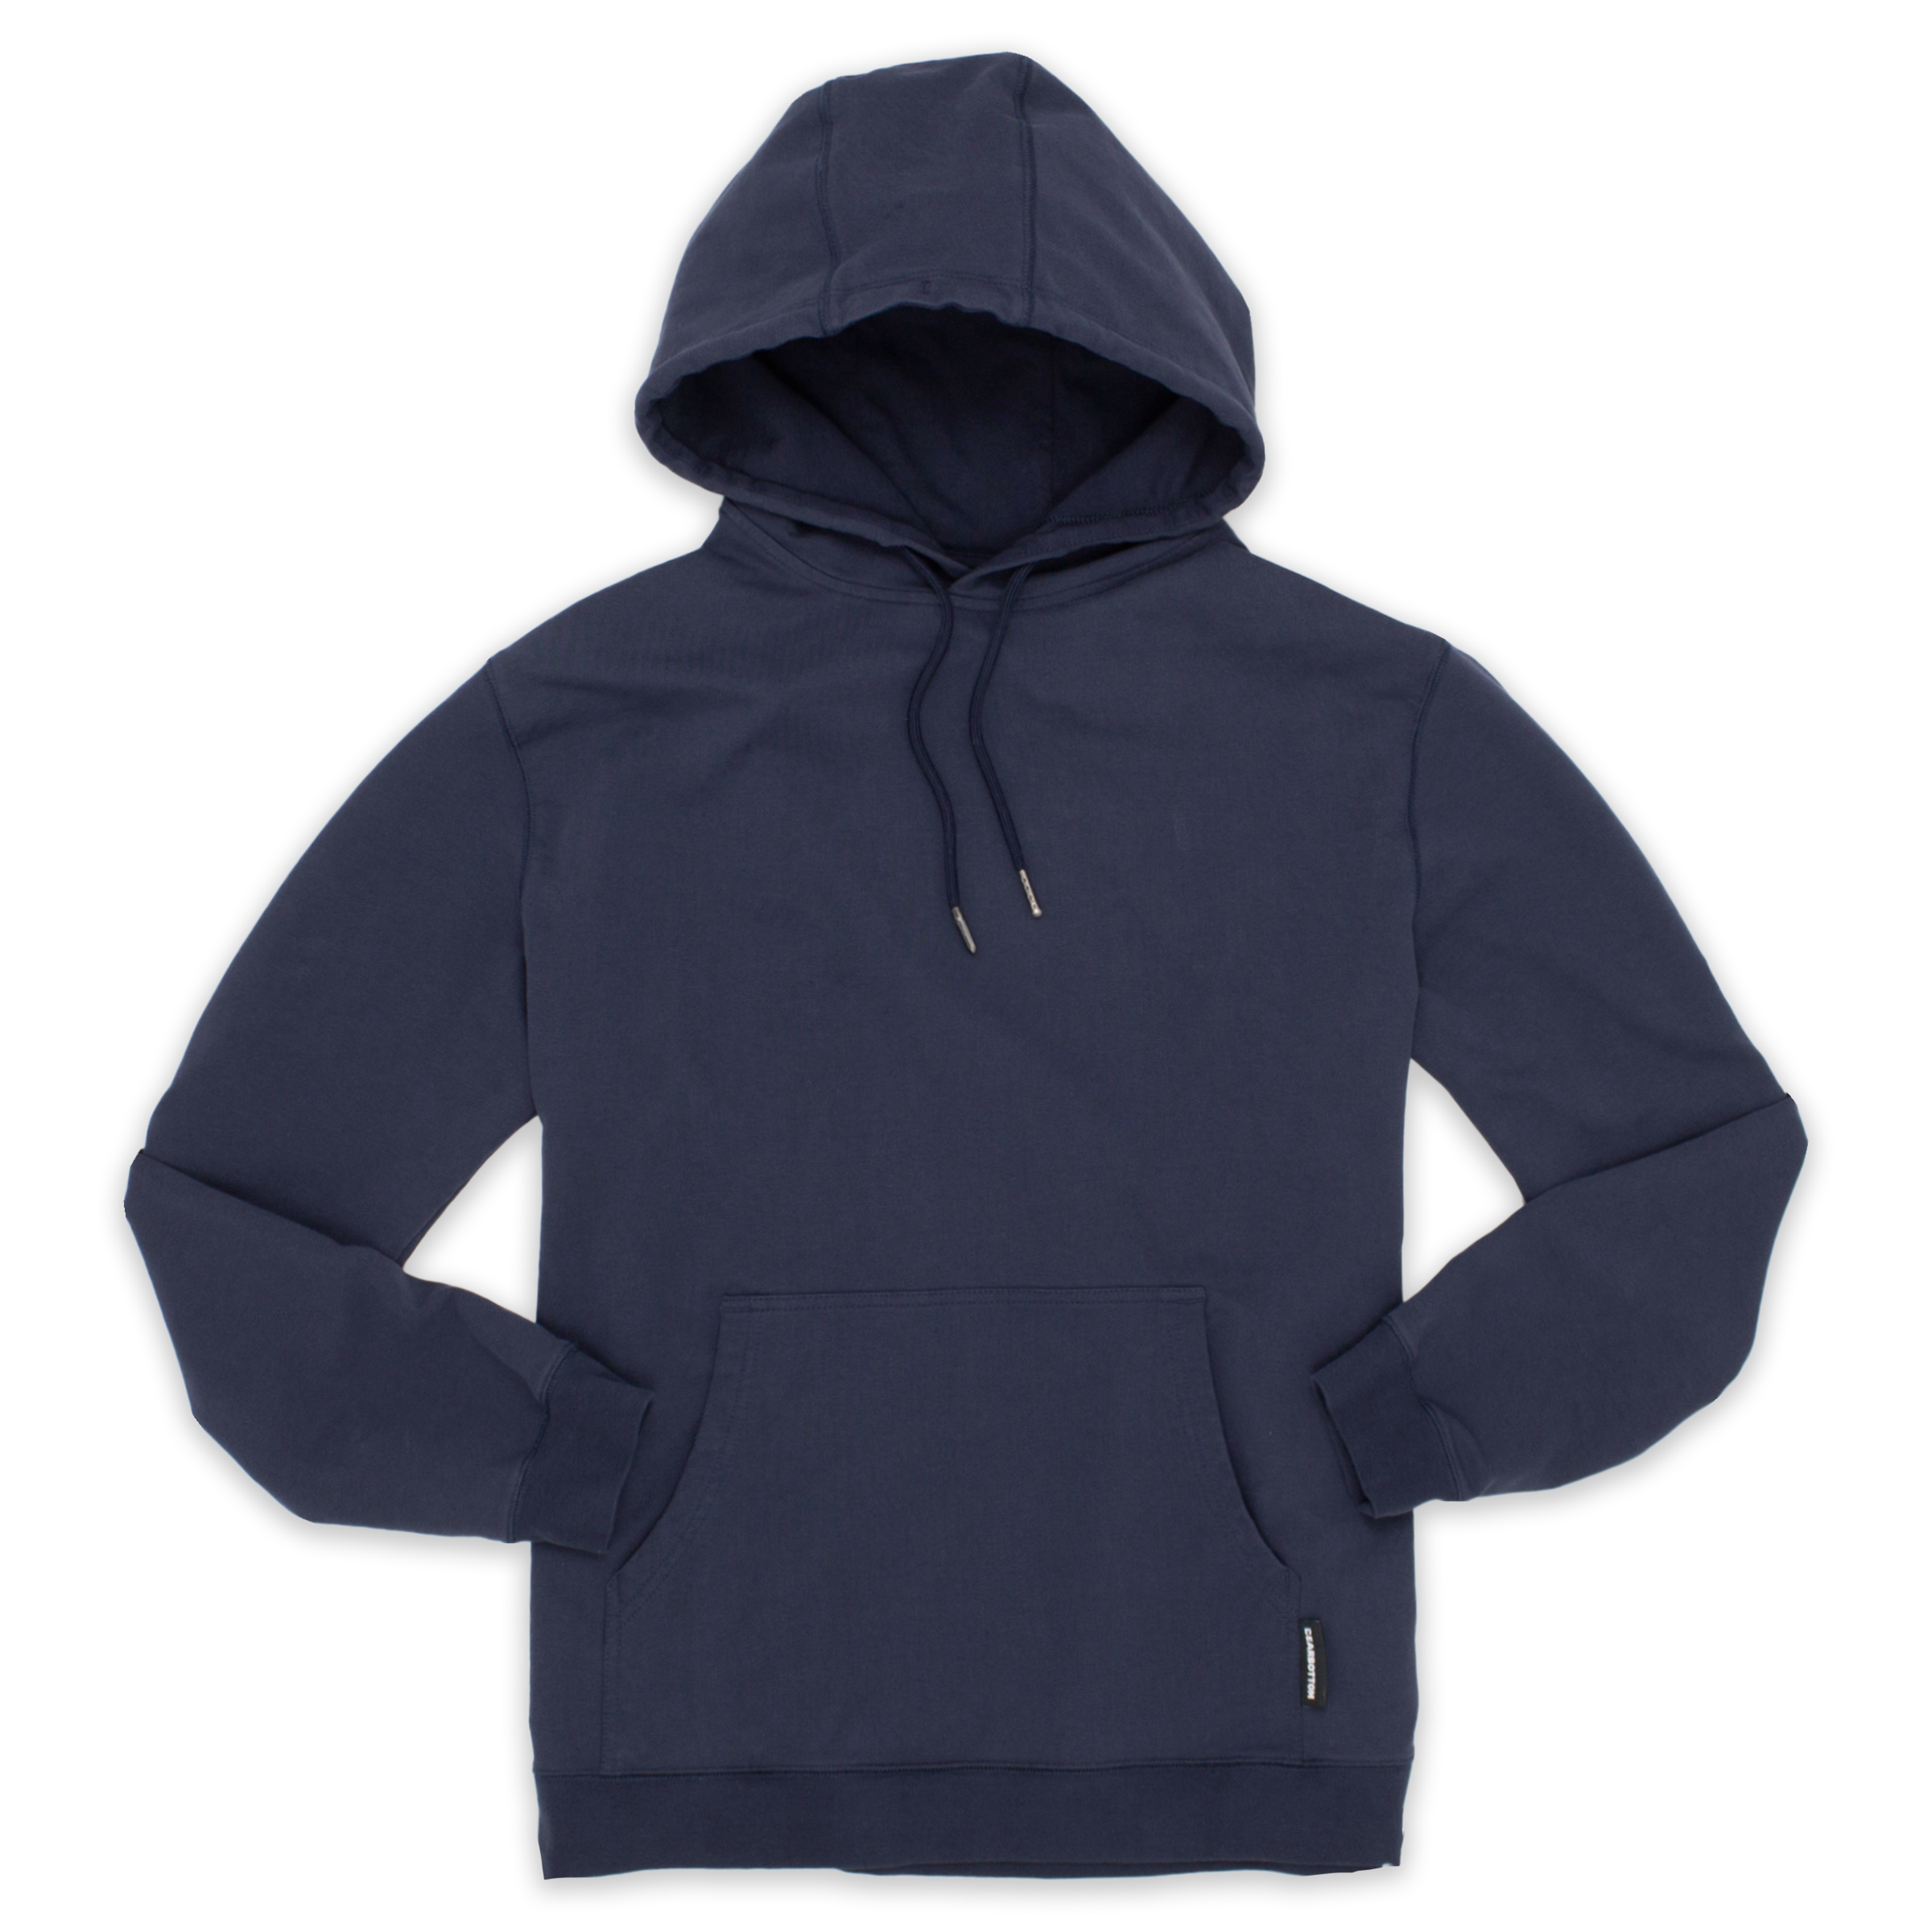 Front of Loft Hoodie Navy with drawstrings with metal tips, kangaroo pocket, and ribbed wrists